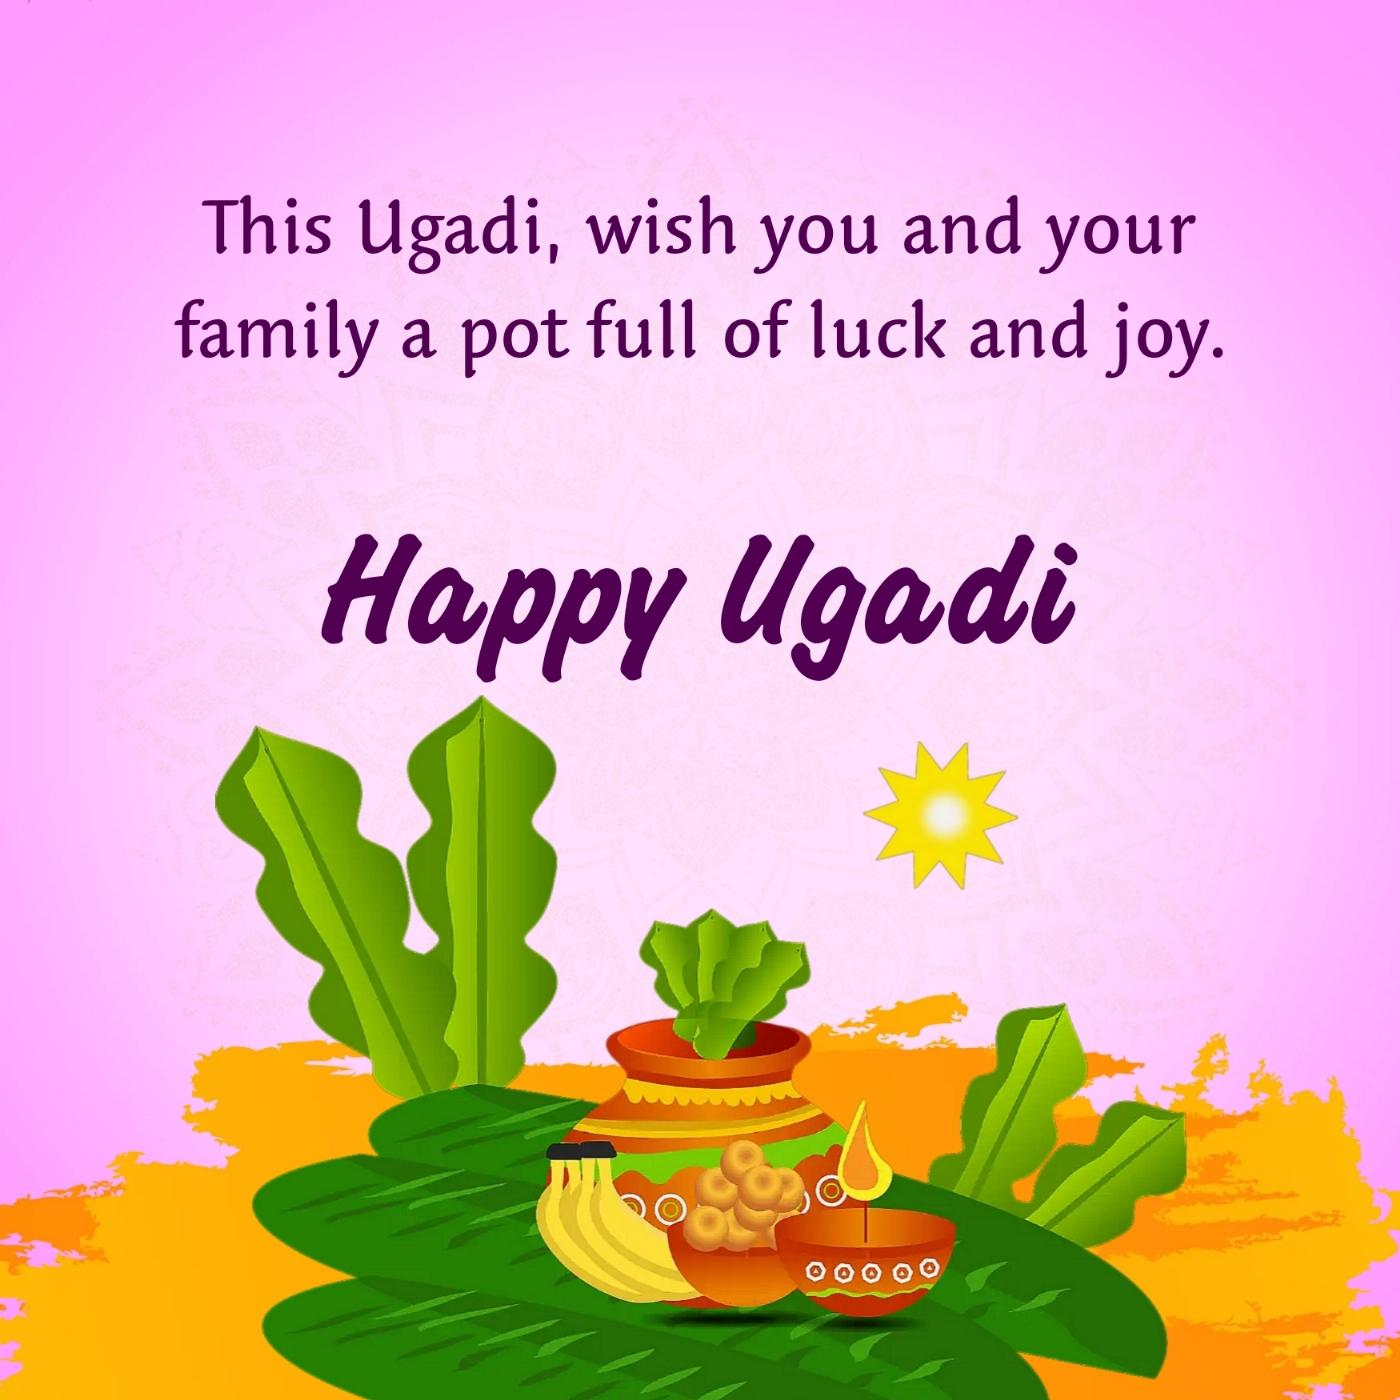 This Ugadi wish you and your family a pot full of luck and joy